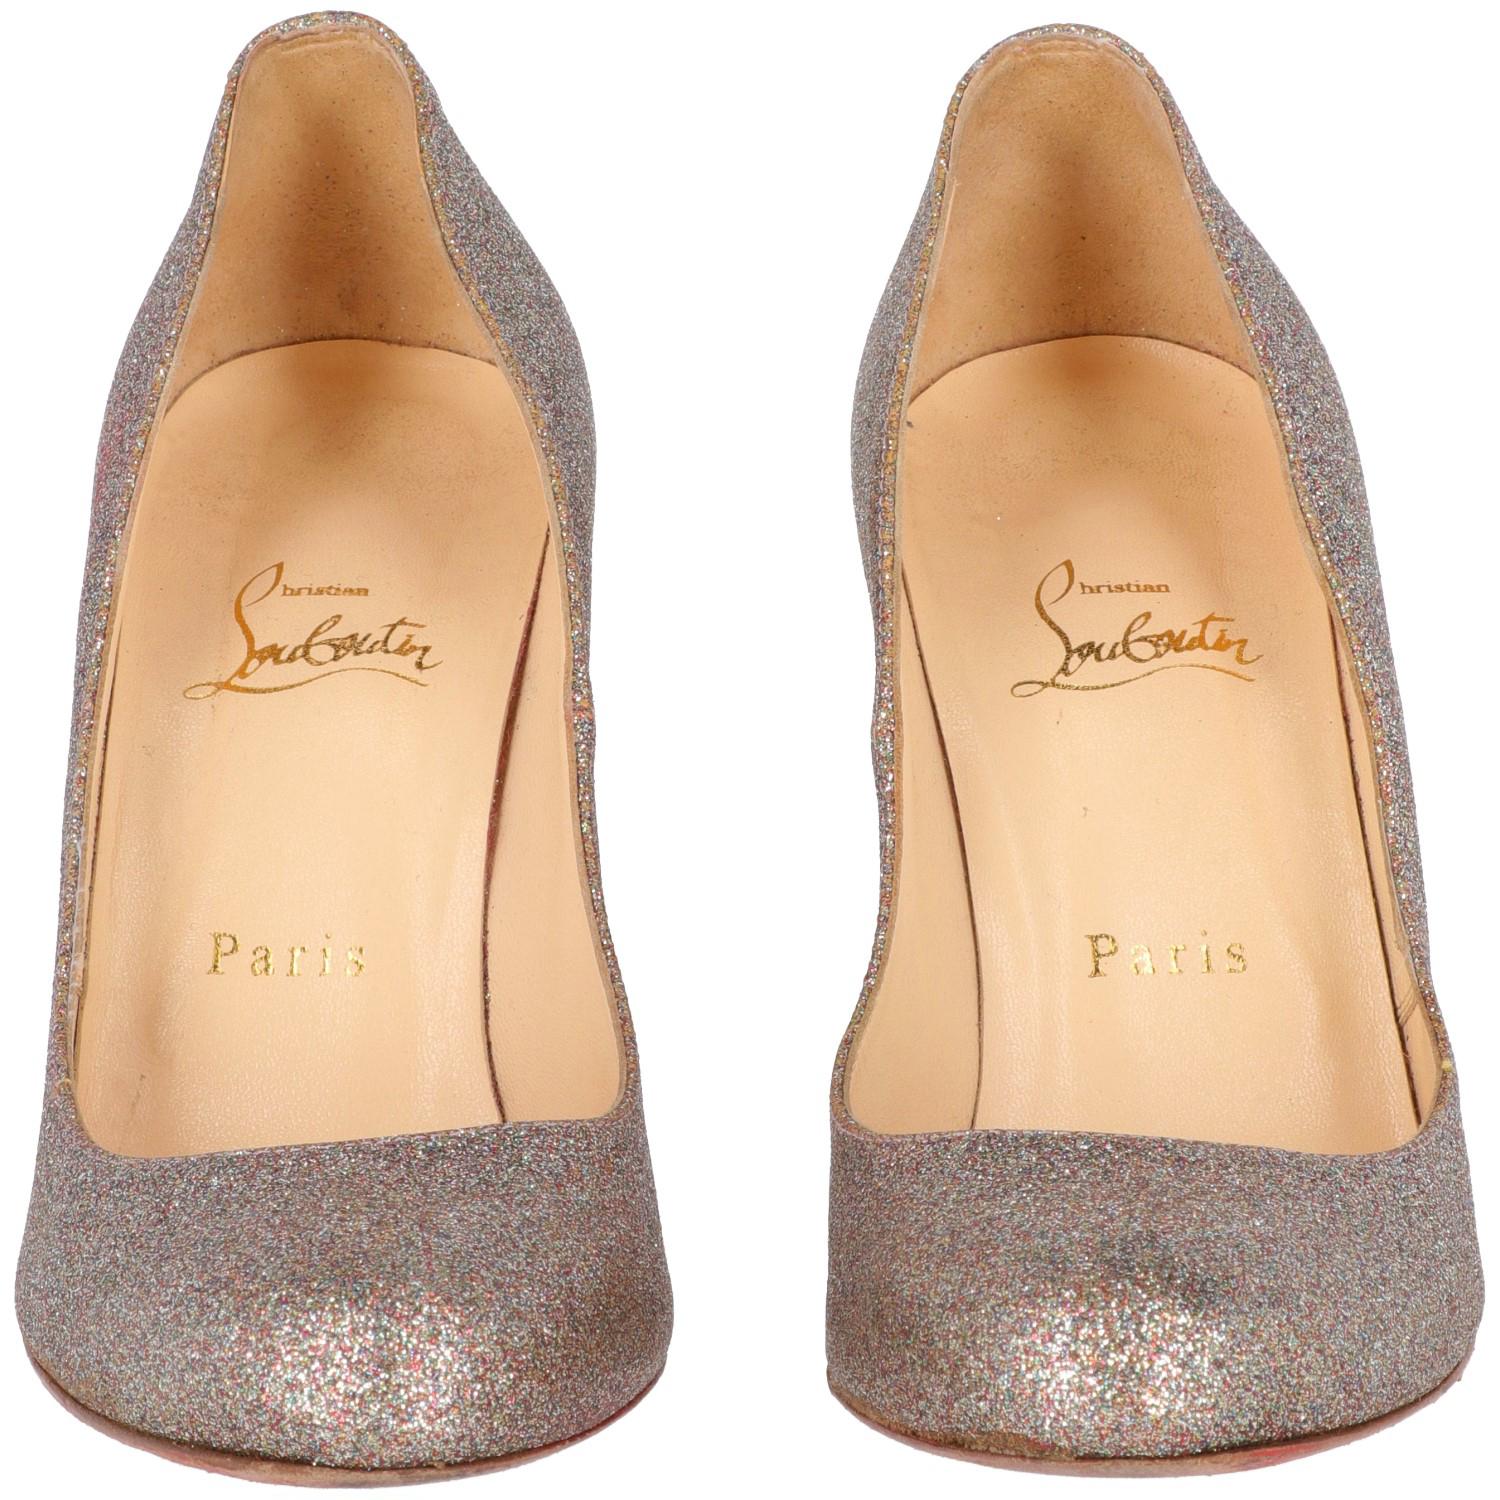 Christian Louboutin Fifille glitter pumps in pink silver, turquoise, beige and gold color, 11 cm high spike heels, round toe and red sole.  

The item shows some scratches and signs of wear at heels, as shown in the pictures.

Made in Italy

Years: